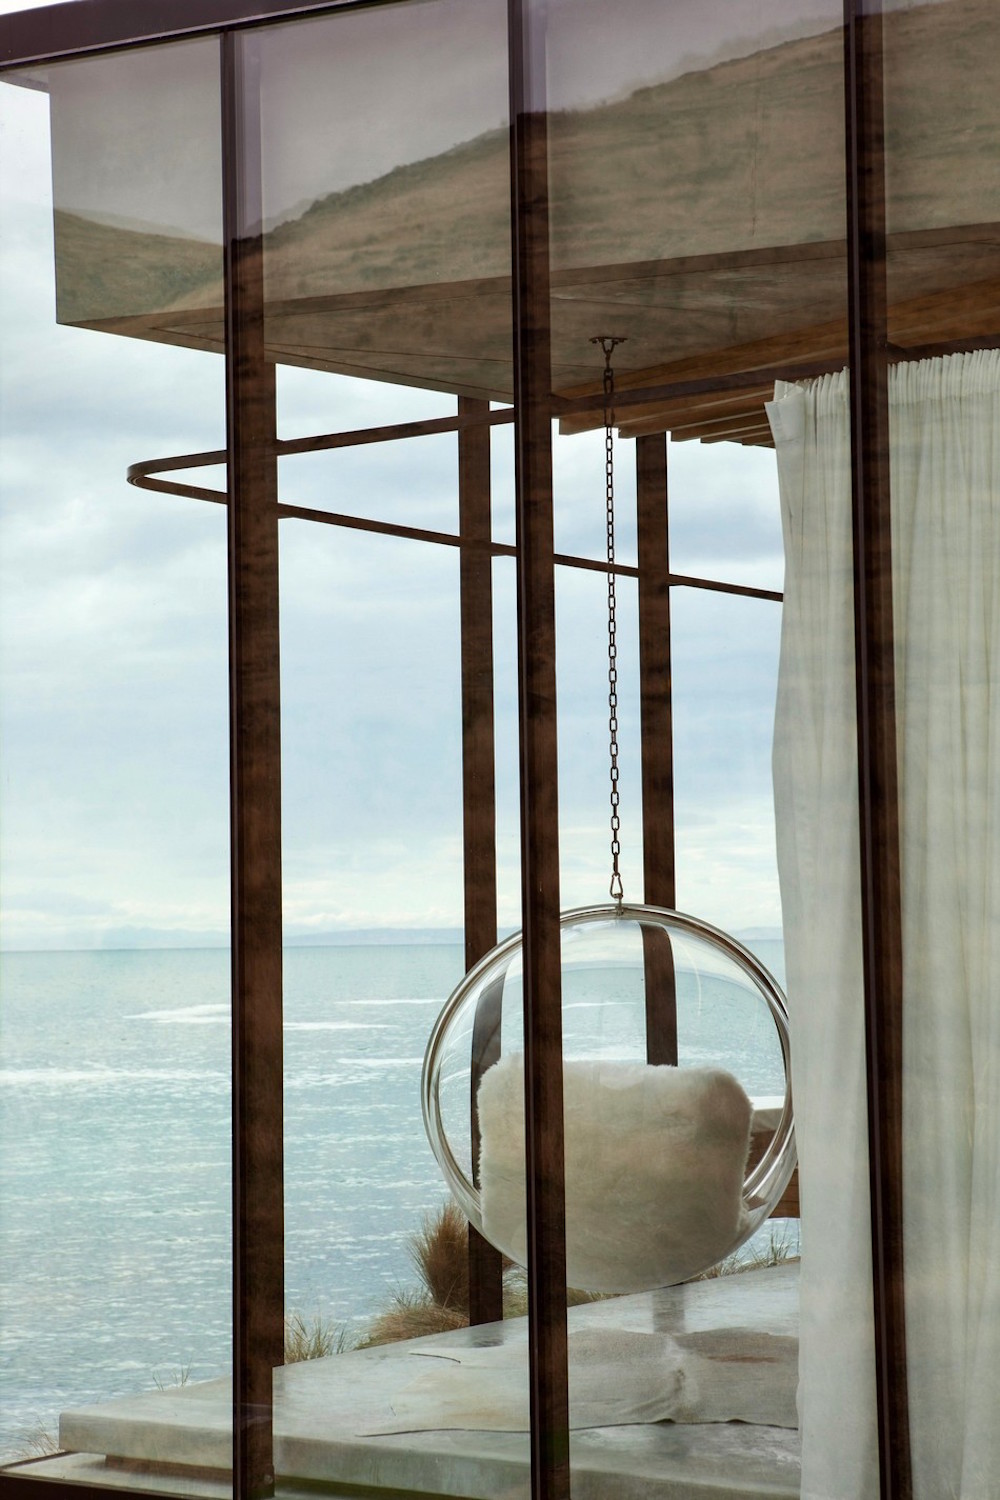 Annandale Seascape, Cottage, New Zealand, Modern, Pattersons, Interiors, Home, Sunday Sanctuary